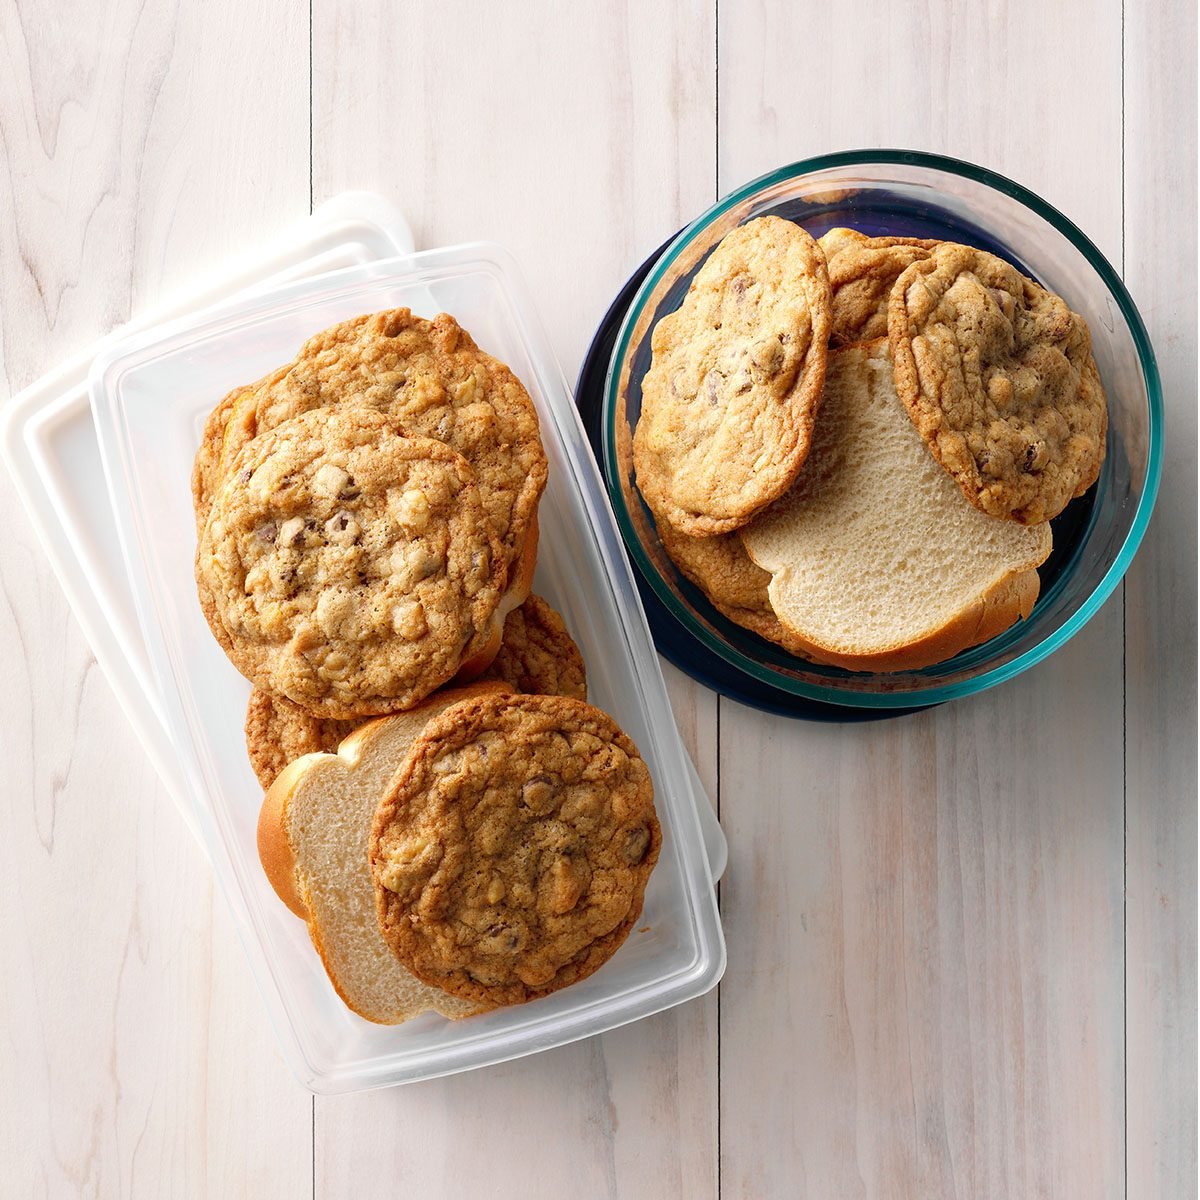 https://www.tasteofhome.com/wp-content/uploads/2019/06/White-Bread-Slices-in-Cookie-Container-1.jpg?fit=700%2C700